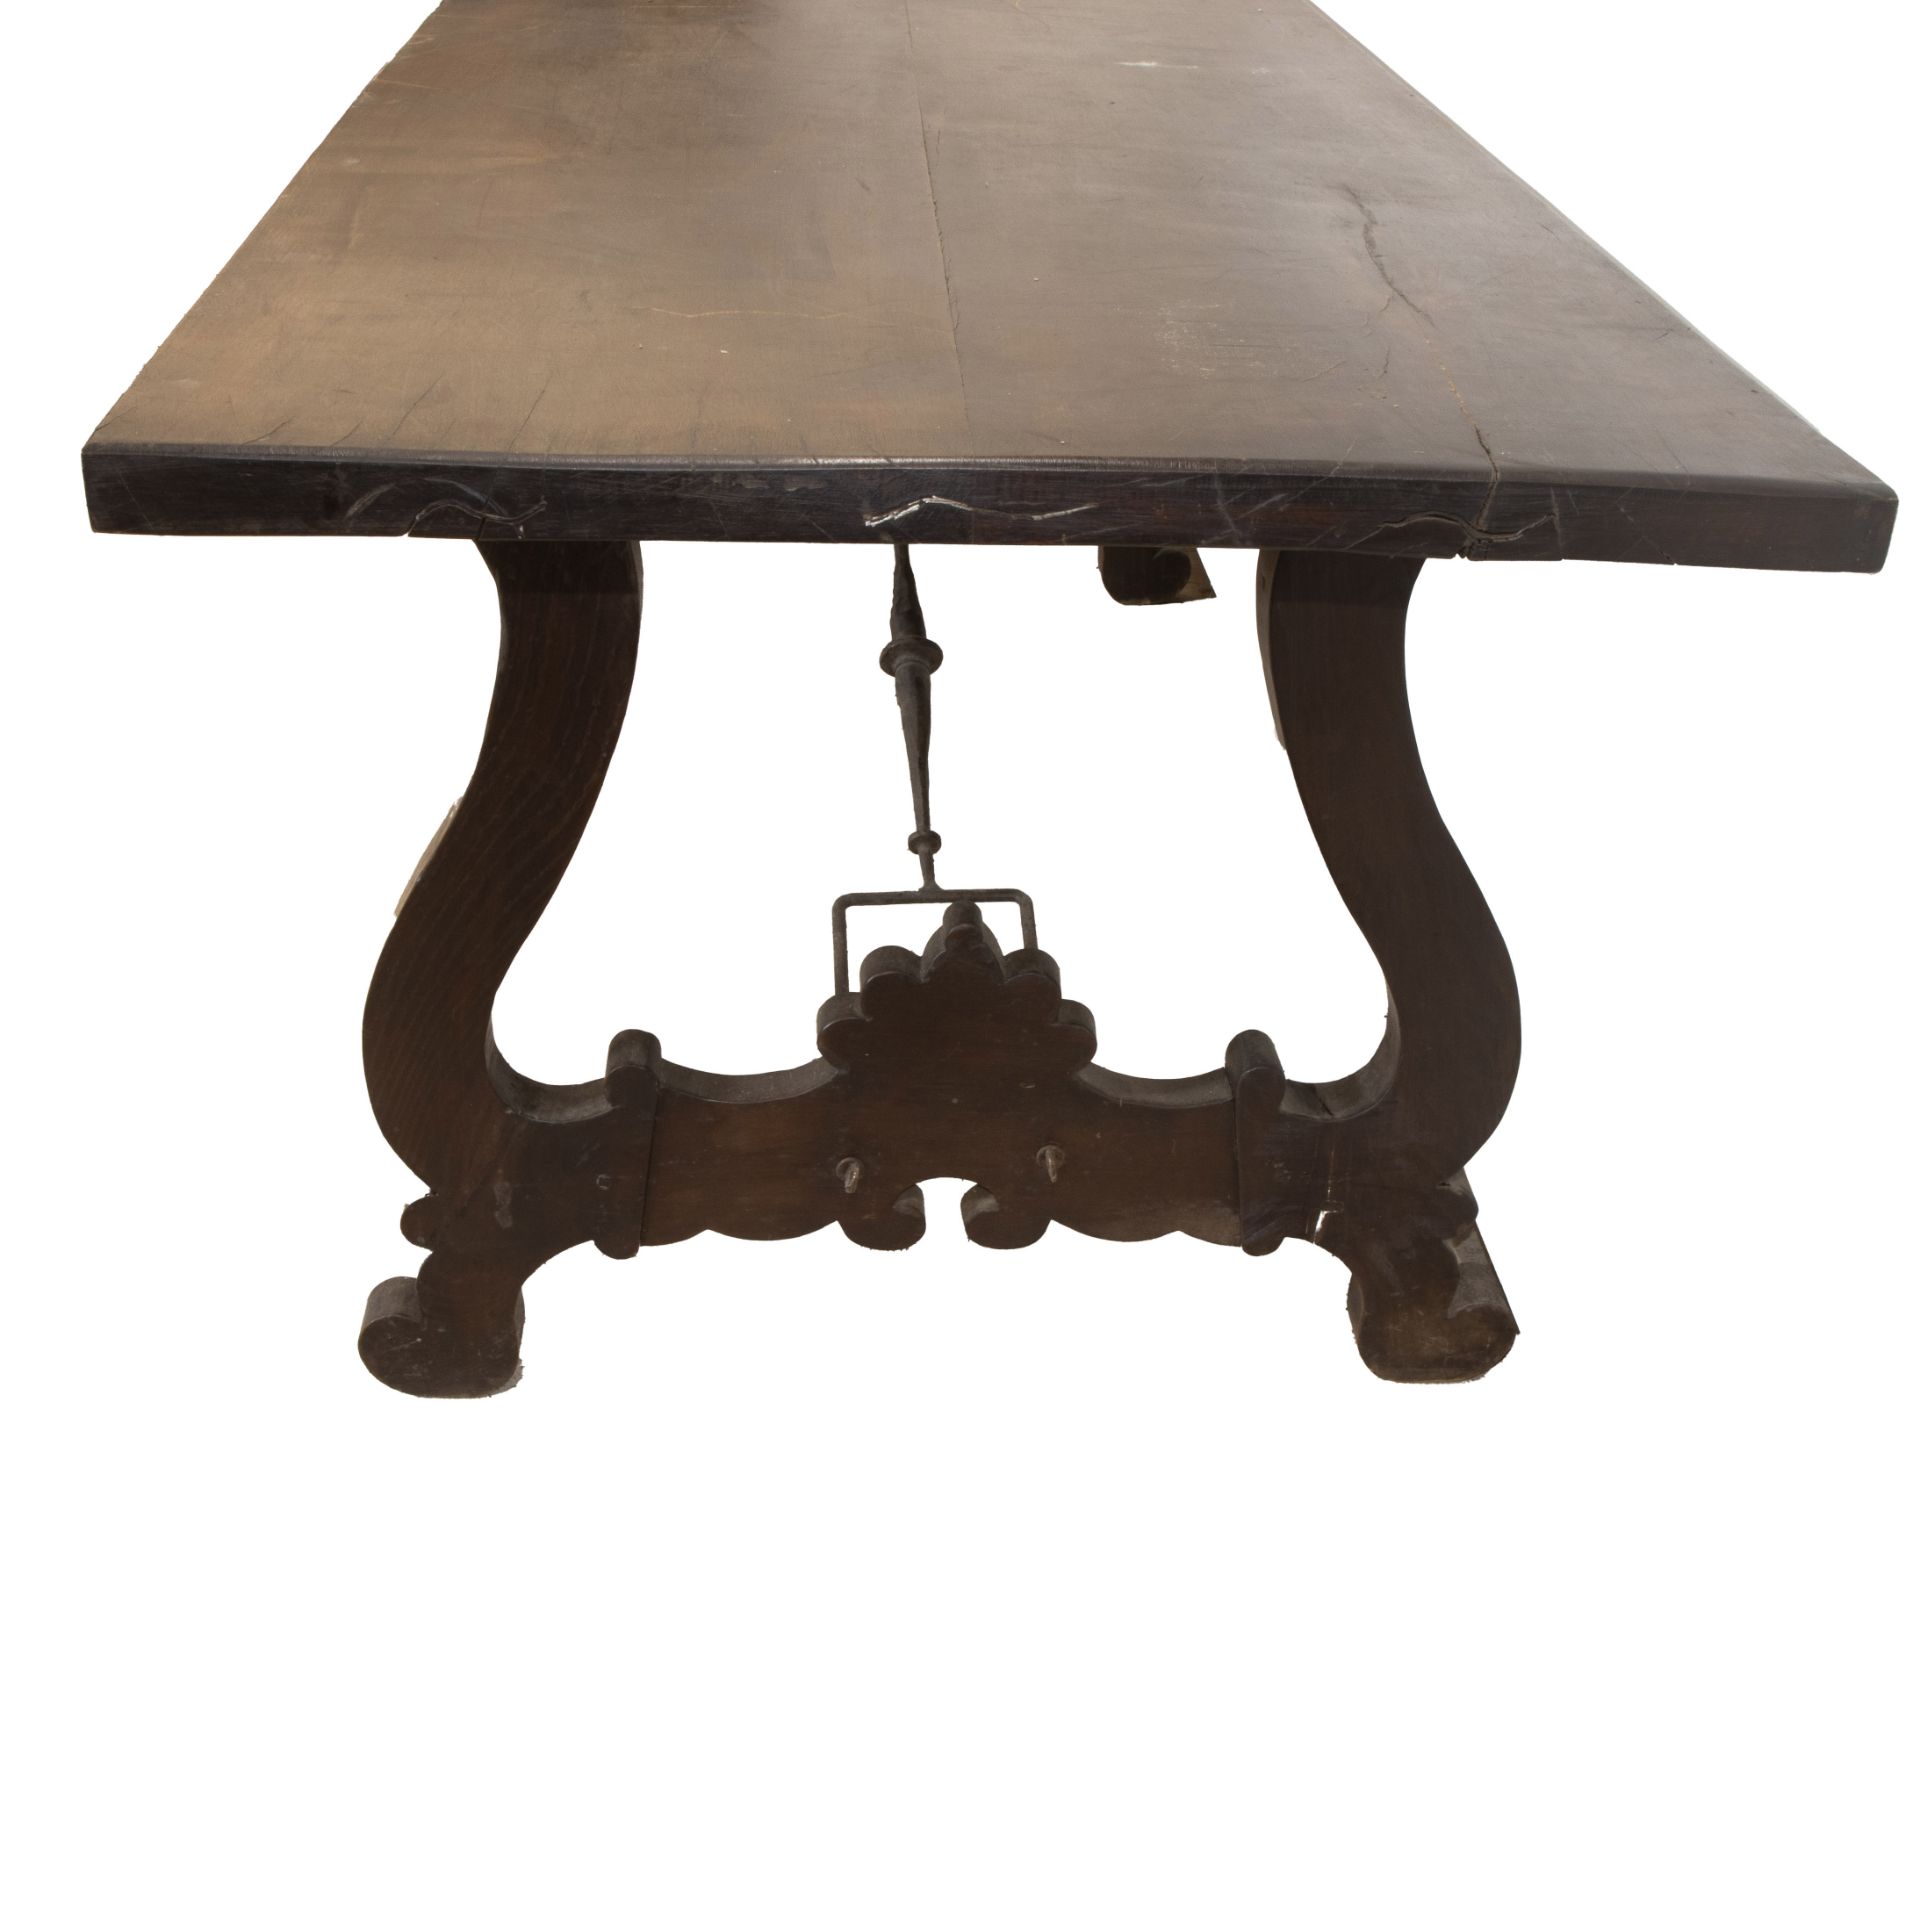 Old oak table with wrought ironwork between the legs after Spanish 17th-century example - Image 3 of 3